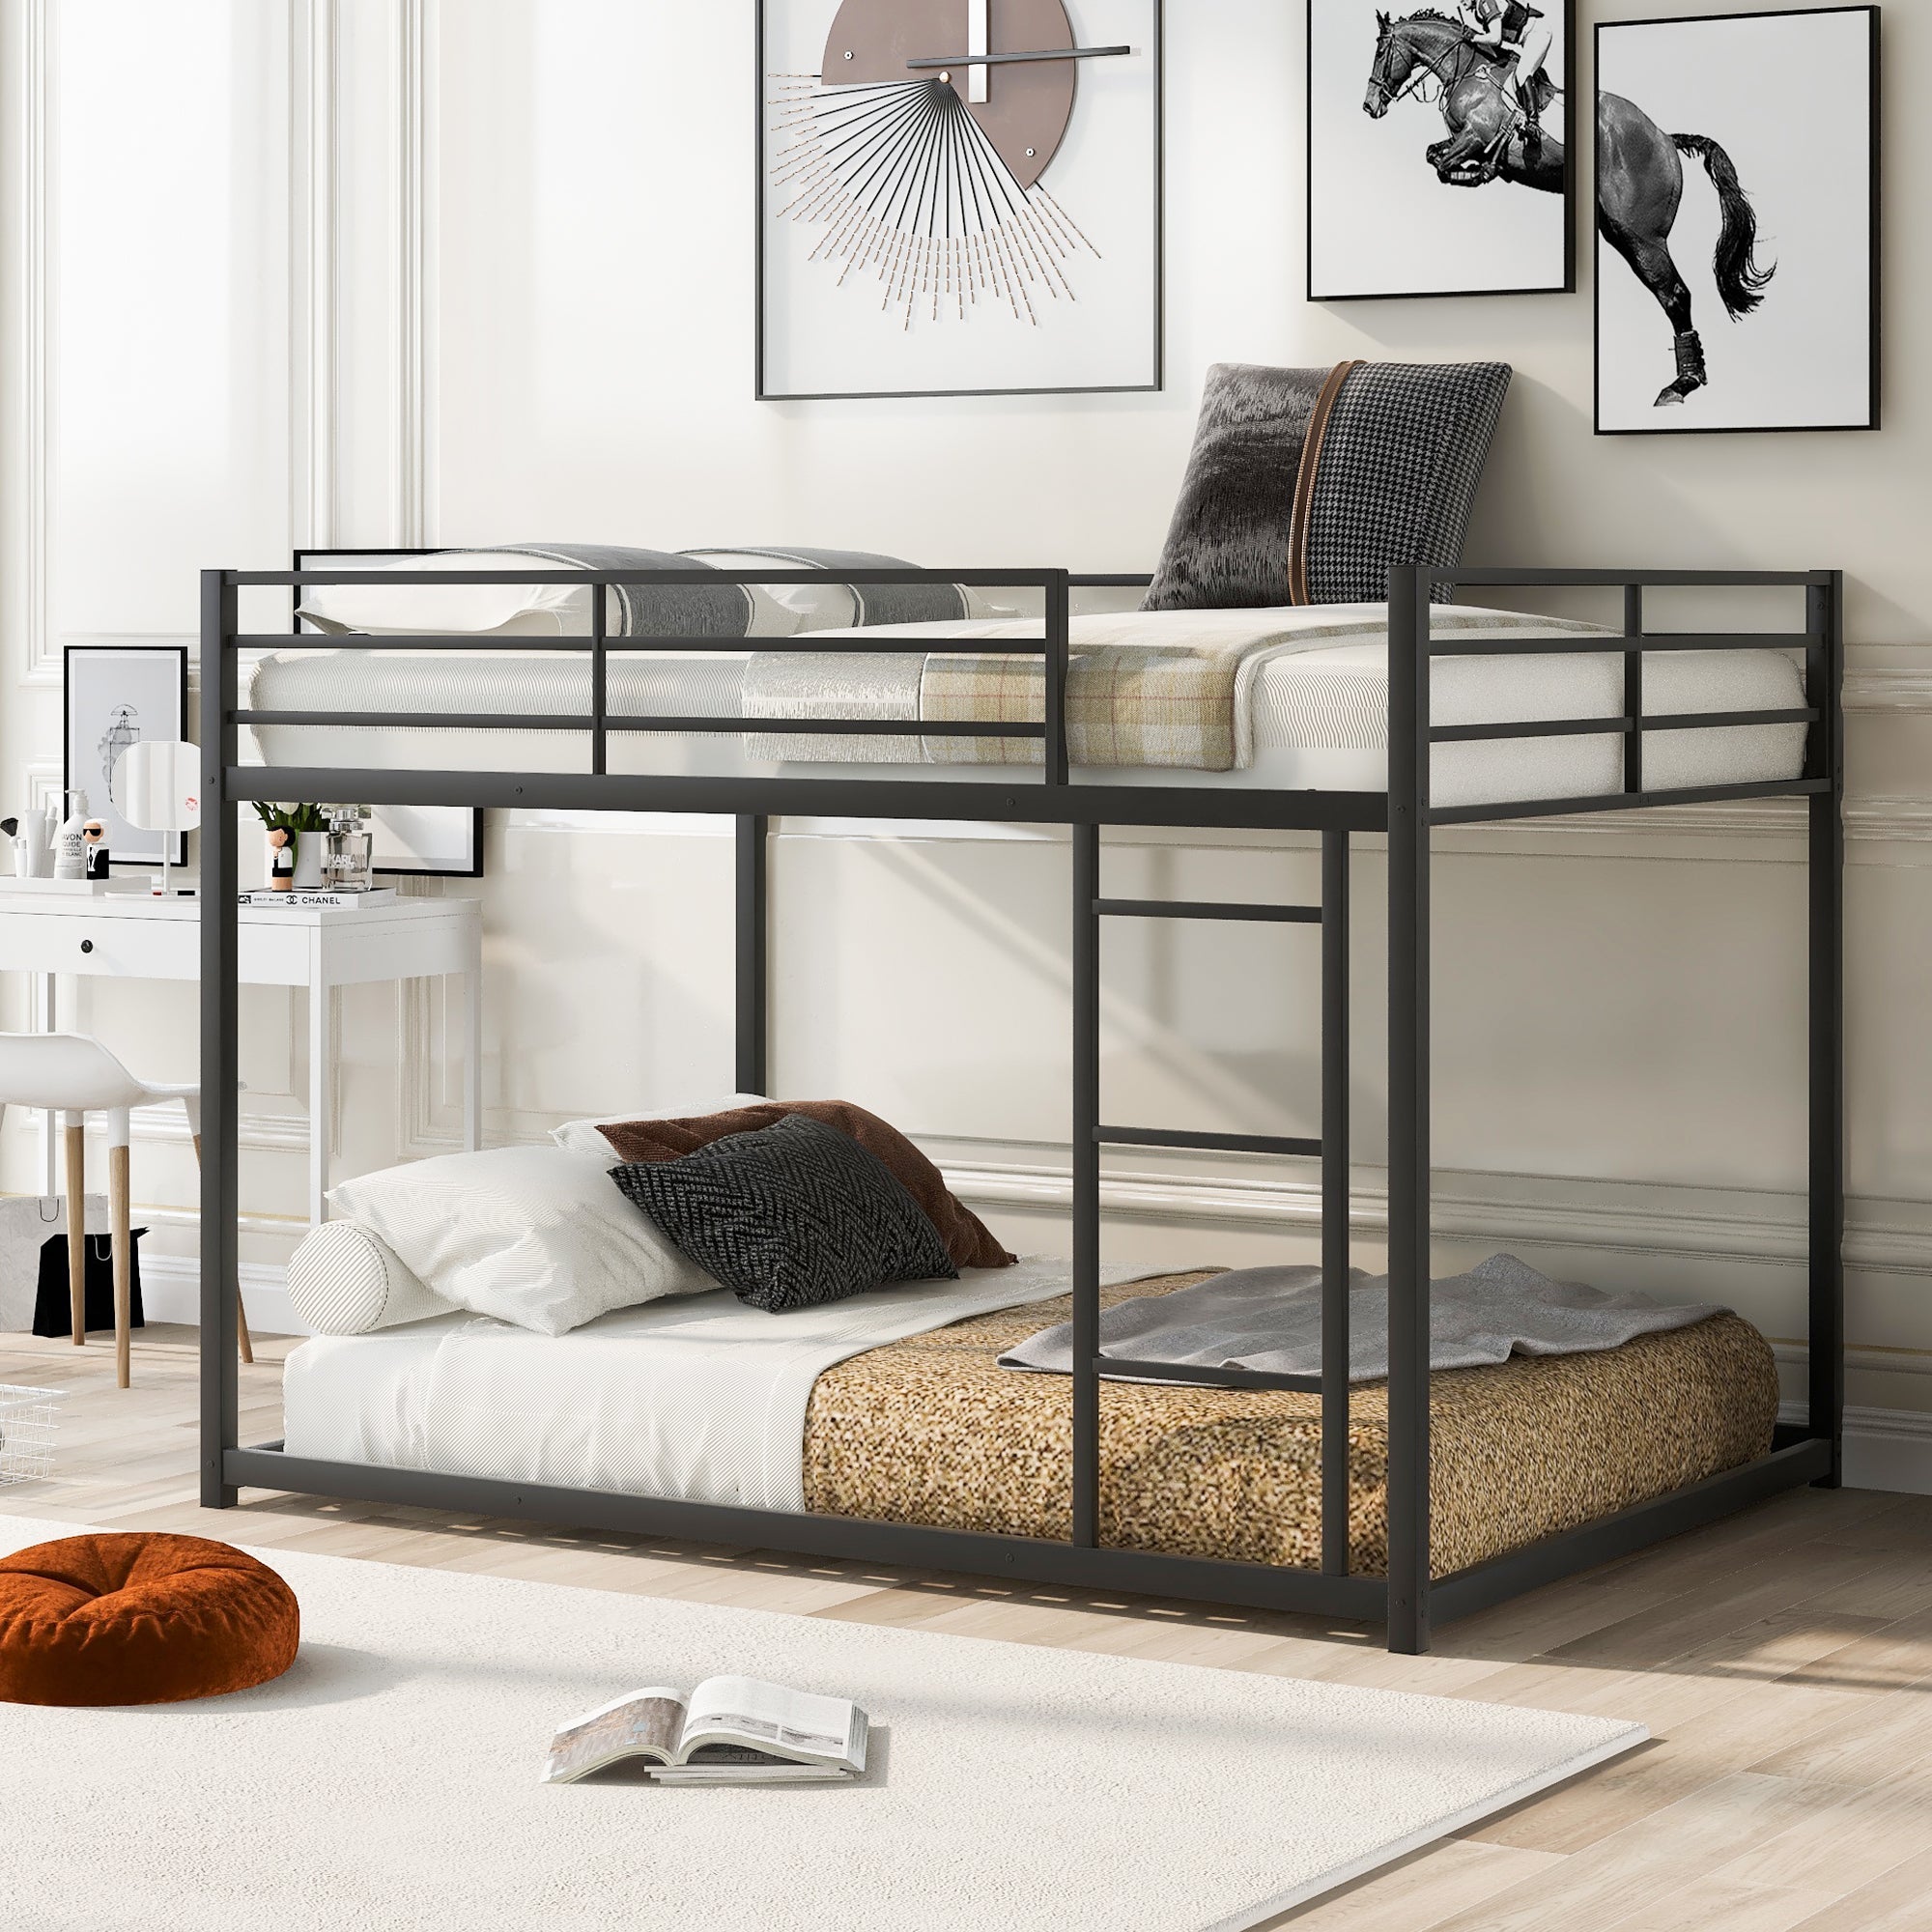 Full over Full Metal Bunk Bed | Low Profile Design with Ladder | Black Finish | Space-Saving Solution